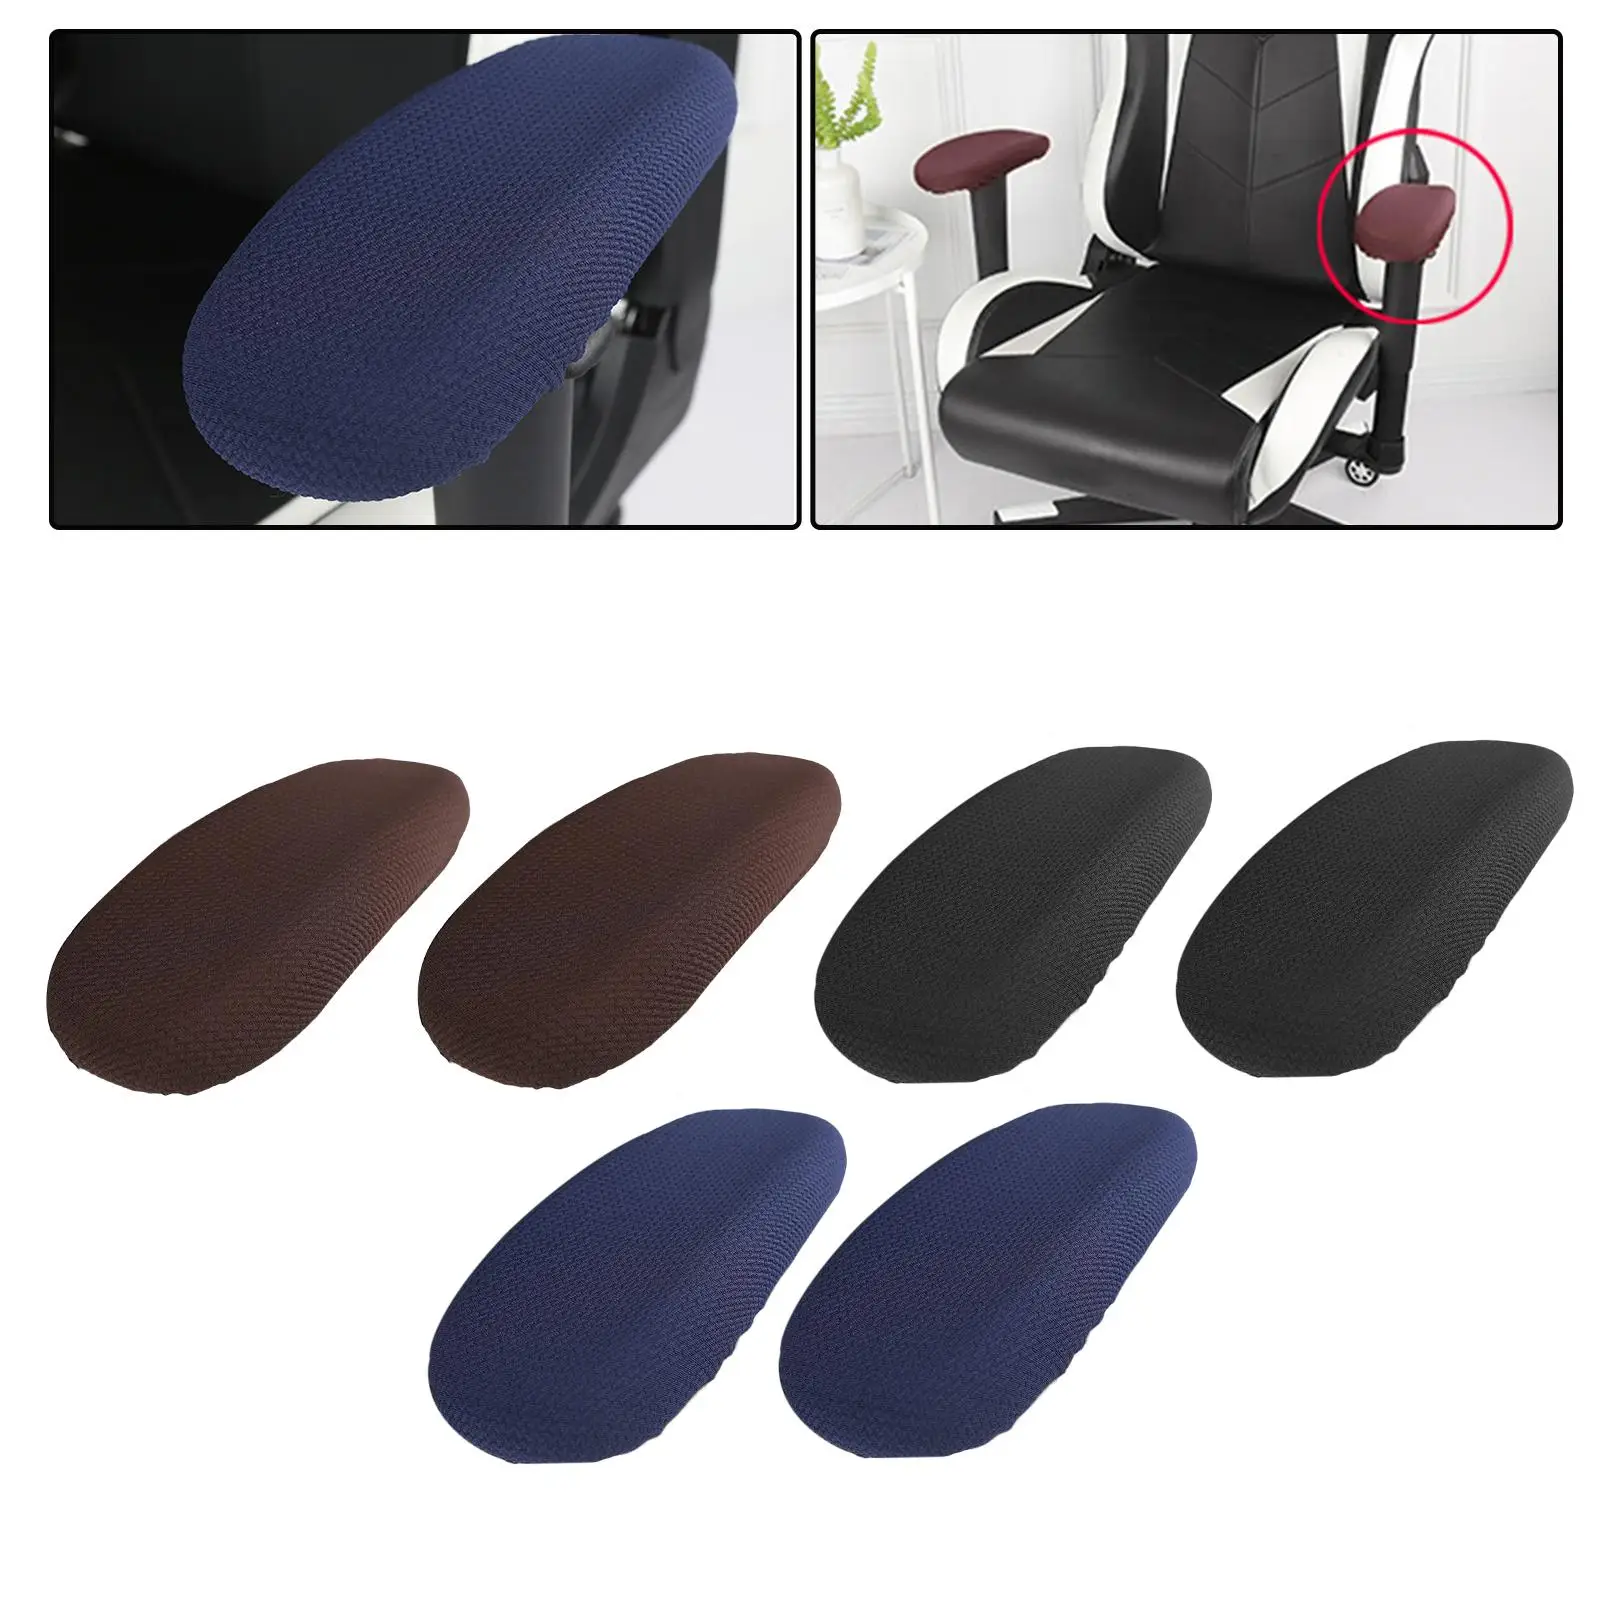 Computer Chair Cover Elastic Stretch for Office Chair, Machine Washable